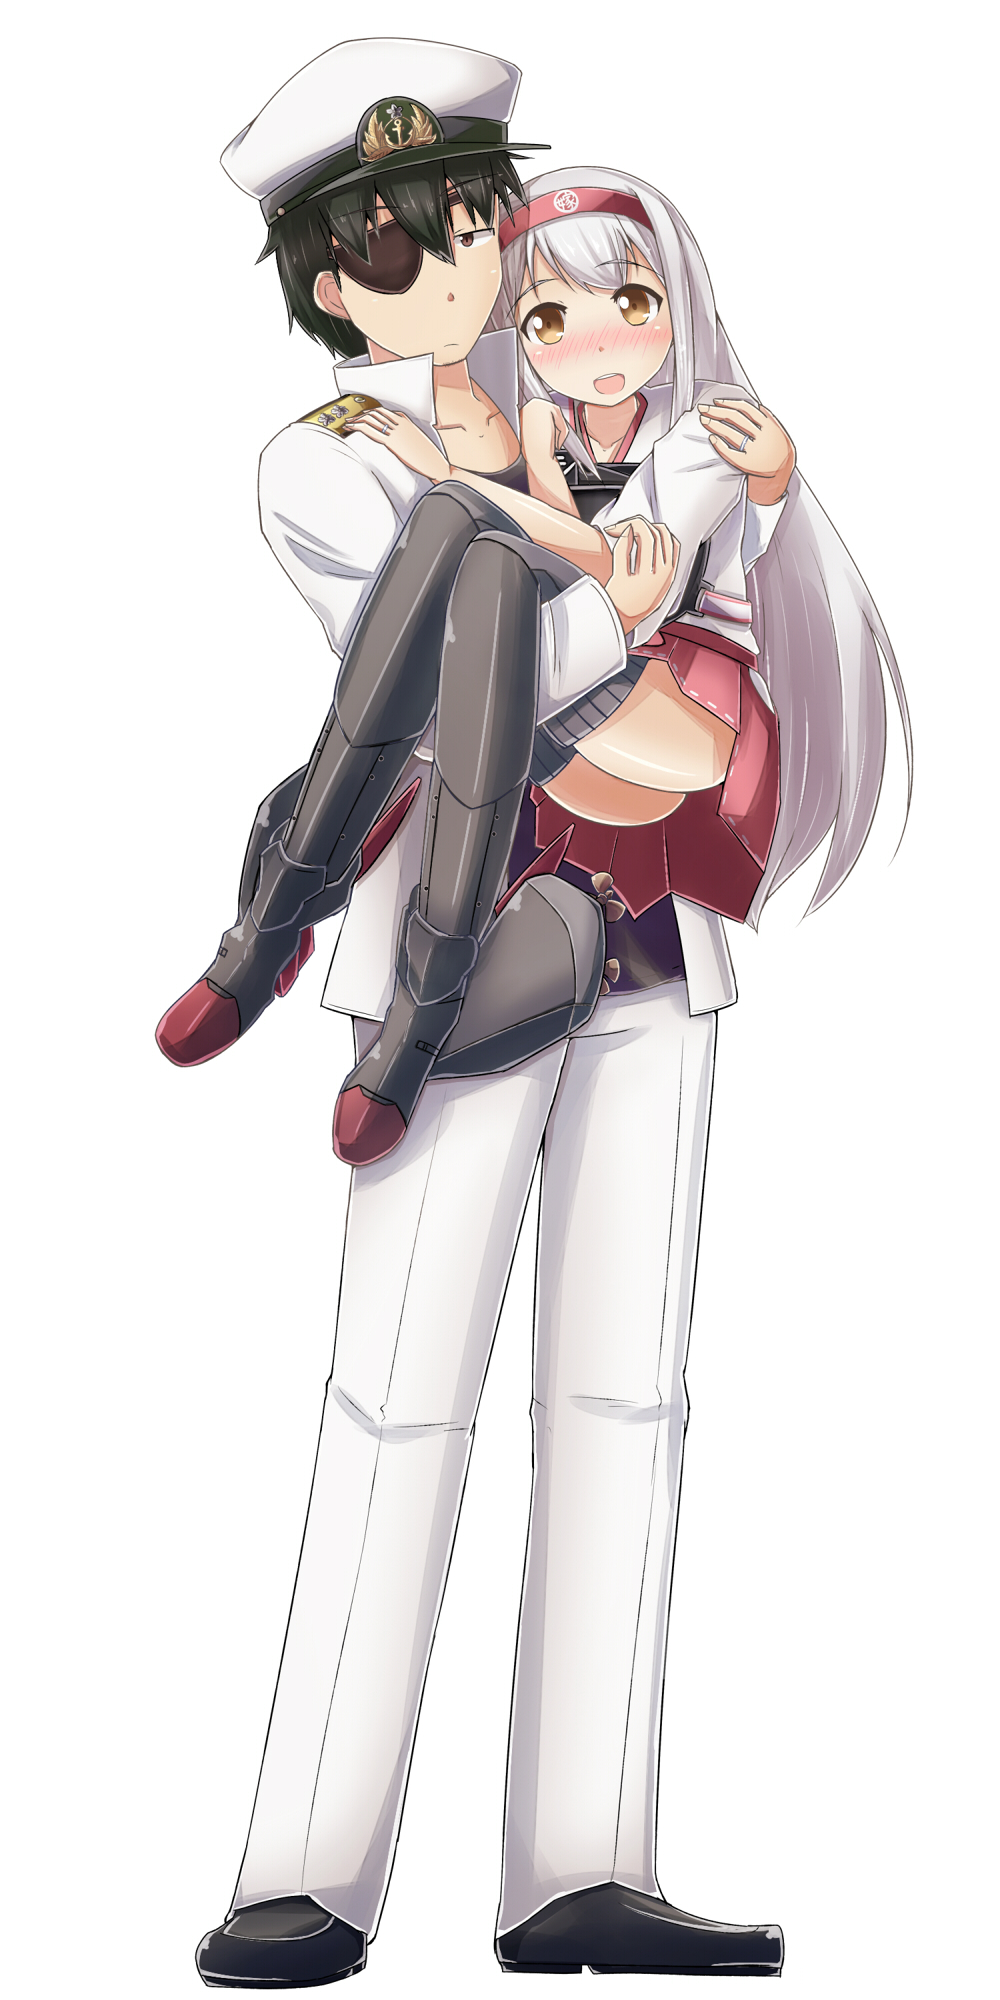 1boy 1girl admiral_(kantai_collection) beard black_legwear blush boots brown_eyes carrying eyepatch facial_hair hair_ornament hair_ribbon hairband hat highres japanese_clothes jewelry kantai_collection long_hair muneate naval_uniform open_mouth personification princess_carry ribbon ring shirt short_hair shoukaku_(kantai_collection) skirt smile thigh_boots thighhighs toramasakby turbine wedding_ring white_hair